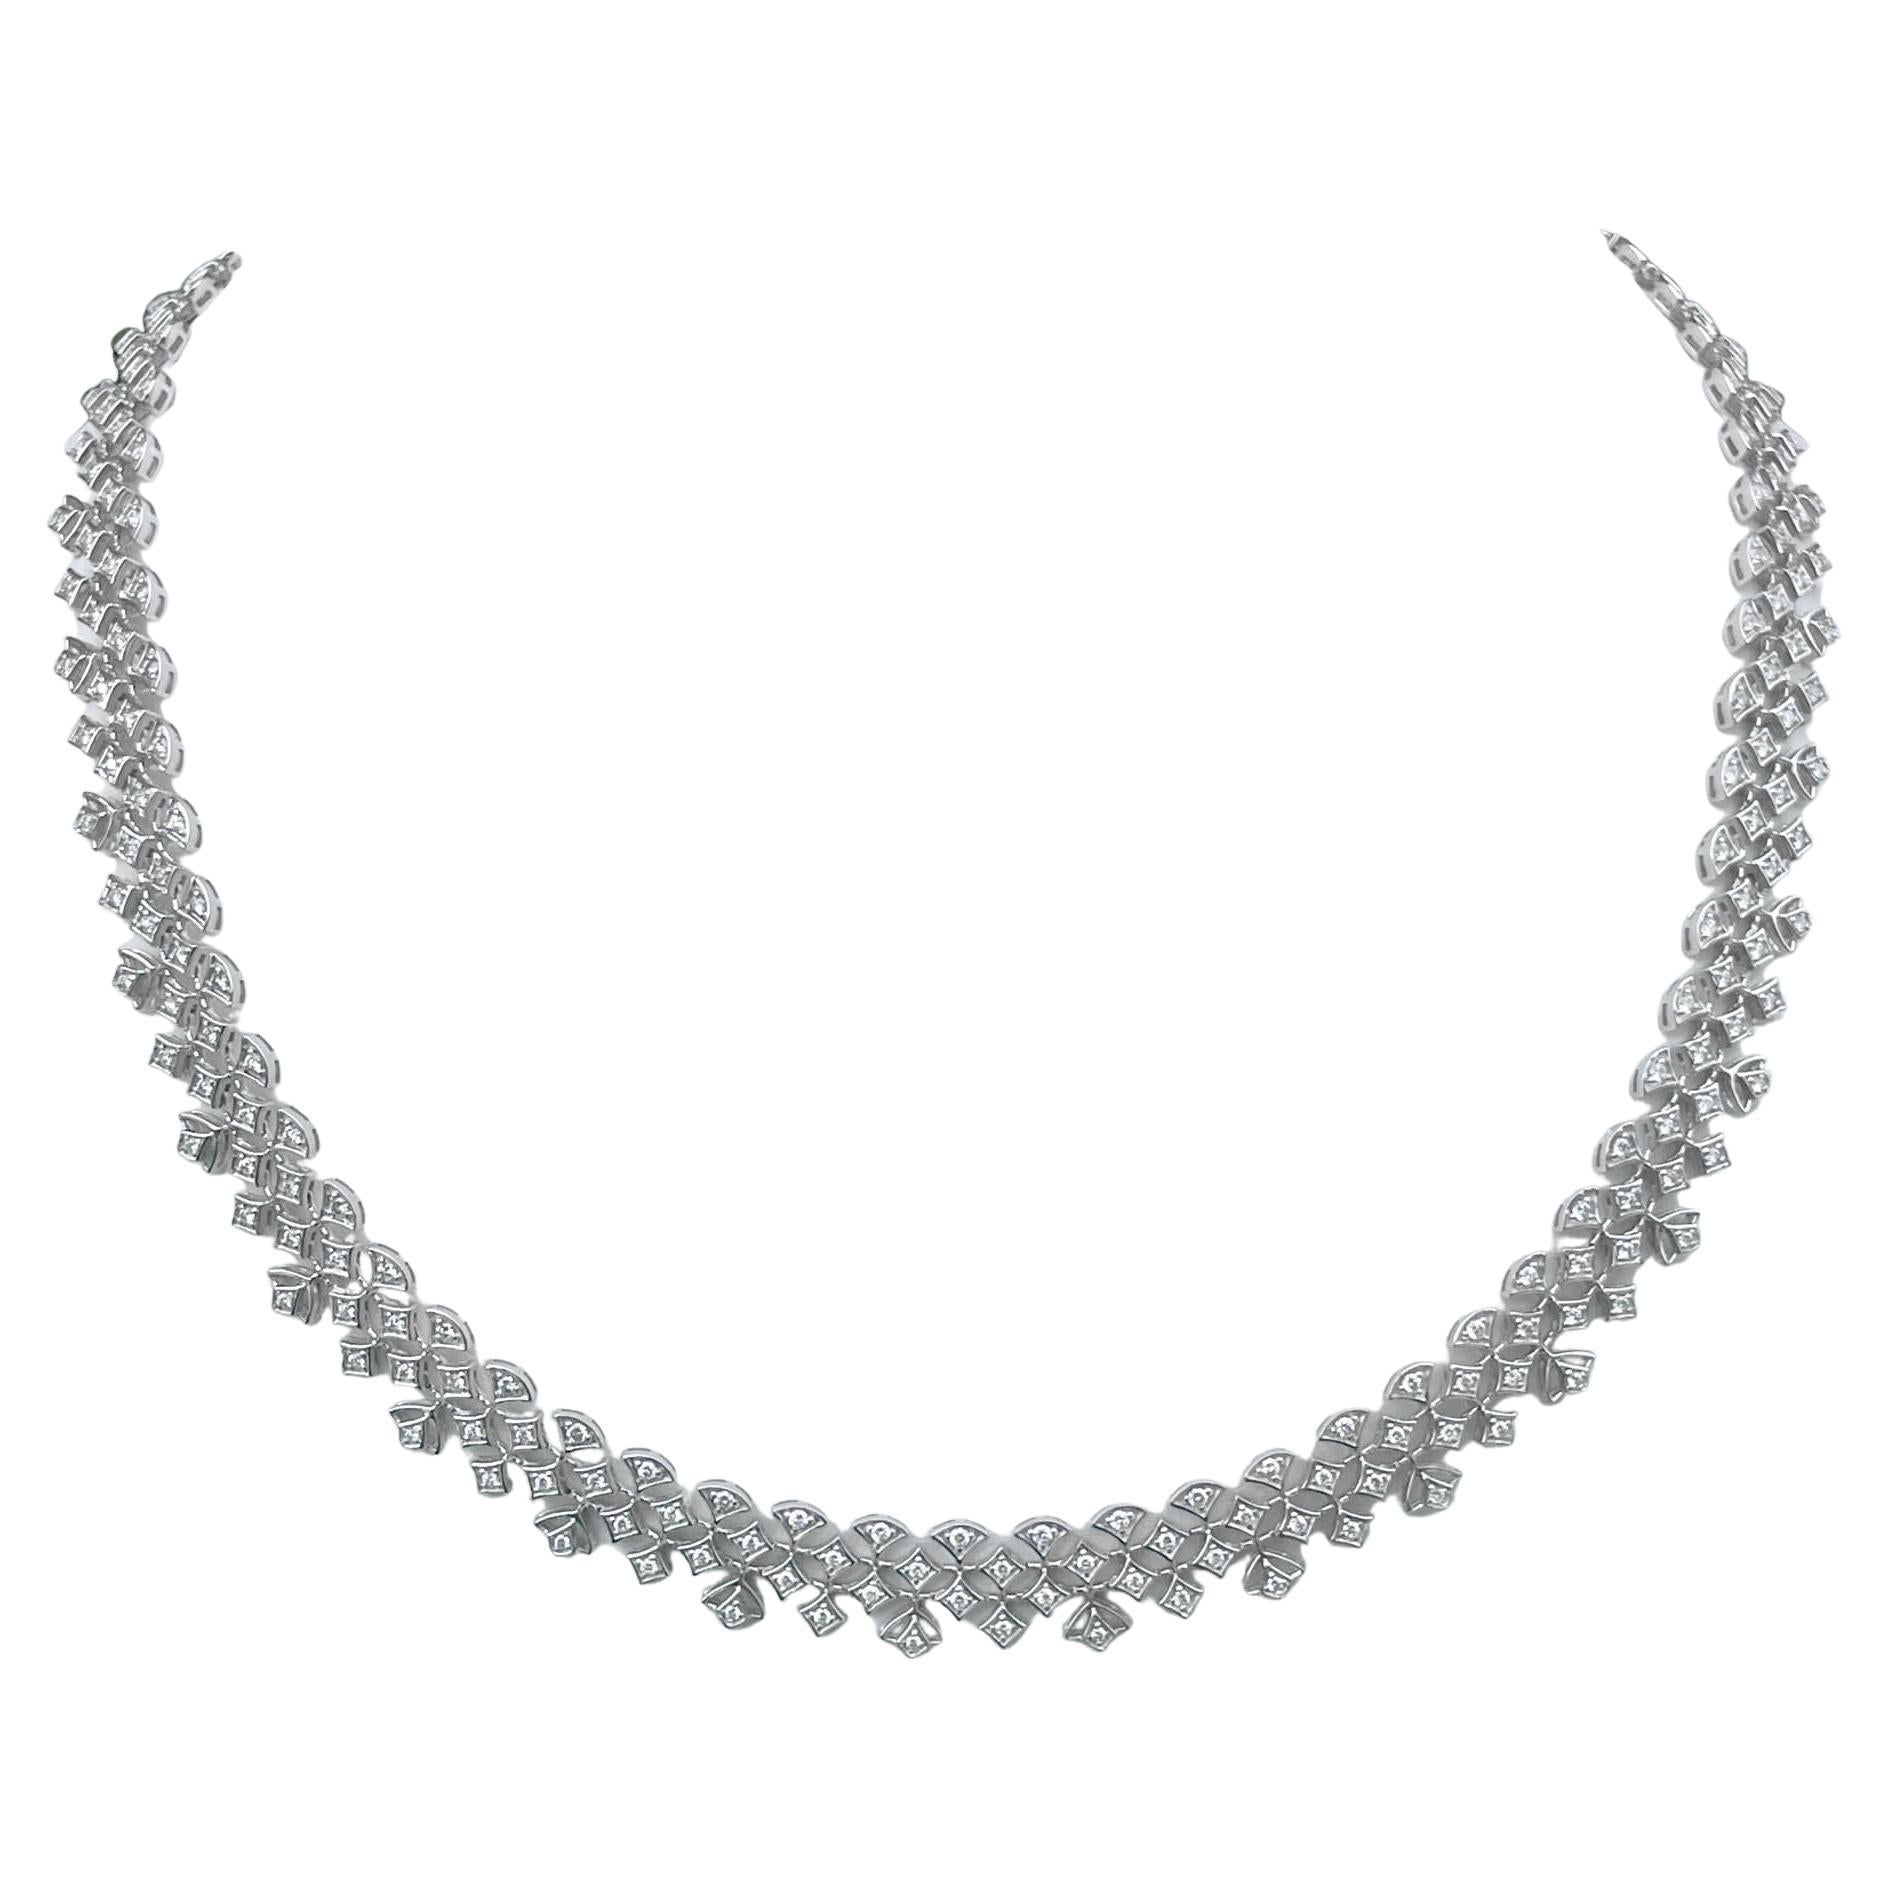 Vintage Bvlgari 'Lucea' Diamond Choker Necklace in 18k White Gold For ...